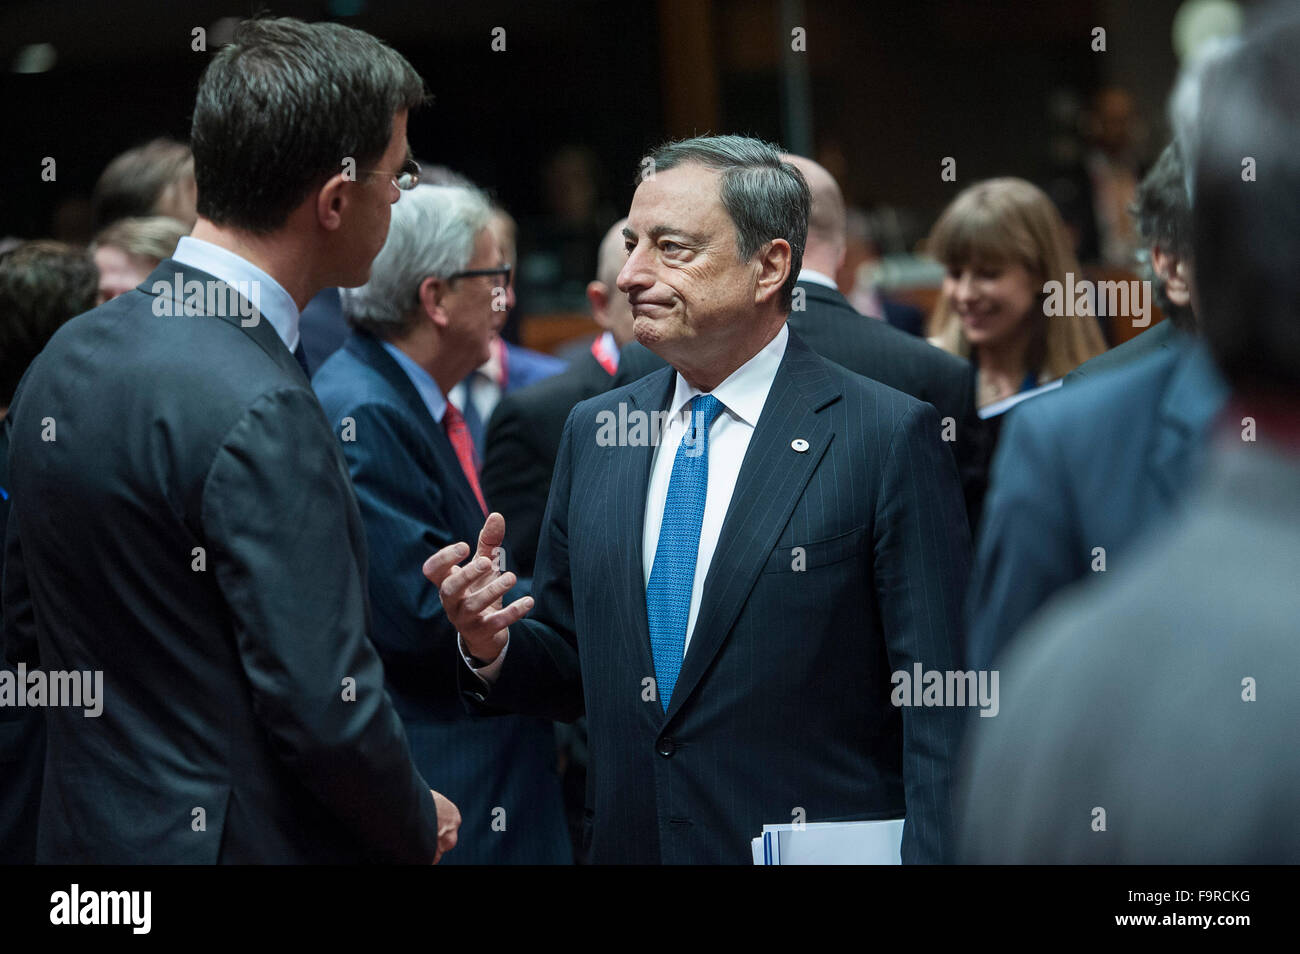 Brussels, Bxl, Belgium. 18th Dec, 2015. Mario Draghi, President of the European Central Bank (L) and Donald Tusk, the president of the European Council prior to the second day of a EU Summit in Brussels, Belgium on 18.12.2015 by Wiktor Dabkowski Credit:  Wiktor Dabkowski/ZUMA Wire/Alamy Live News Stock Photo